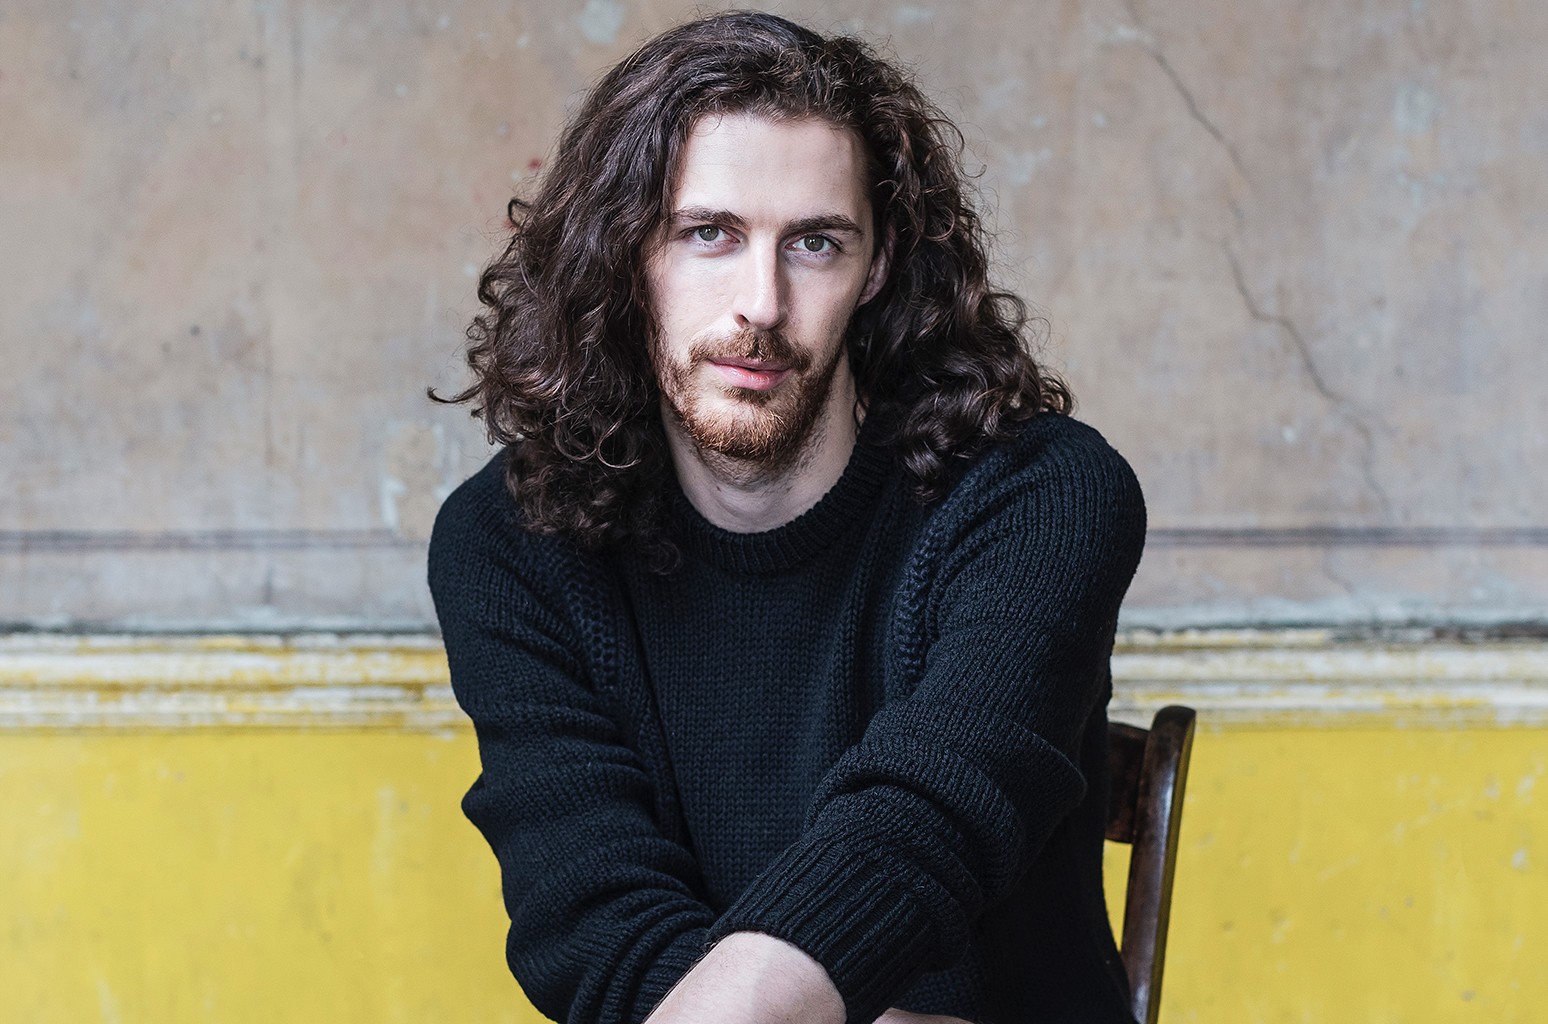 Dating hozier Does Hozier